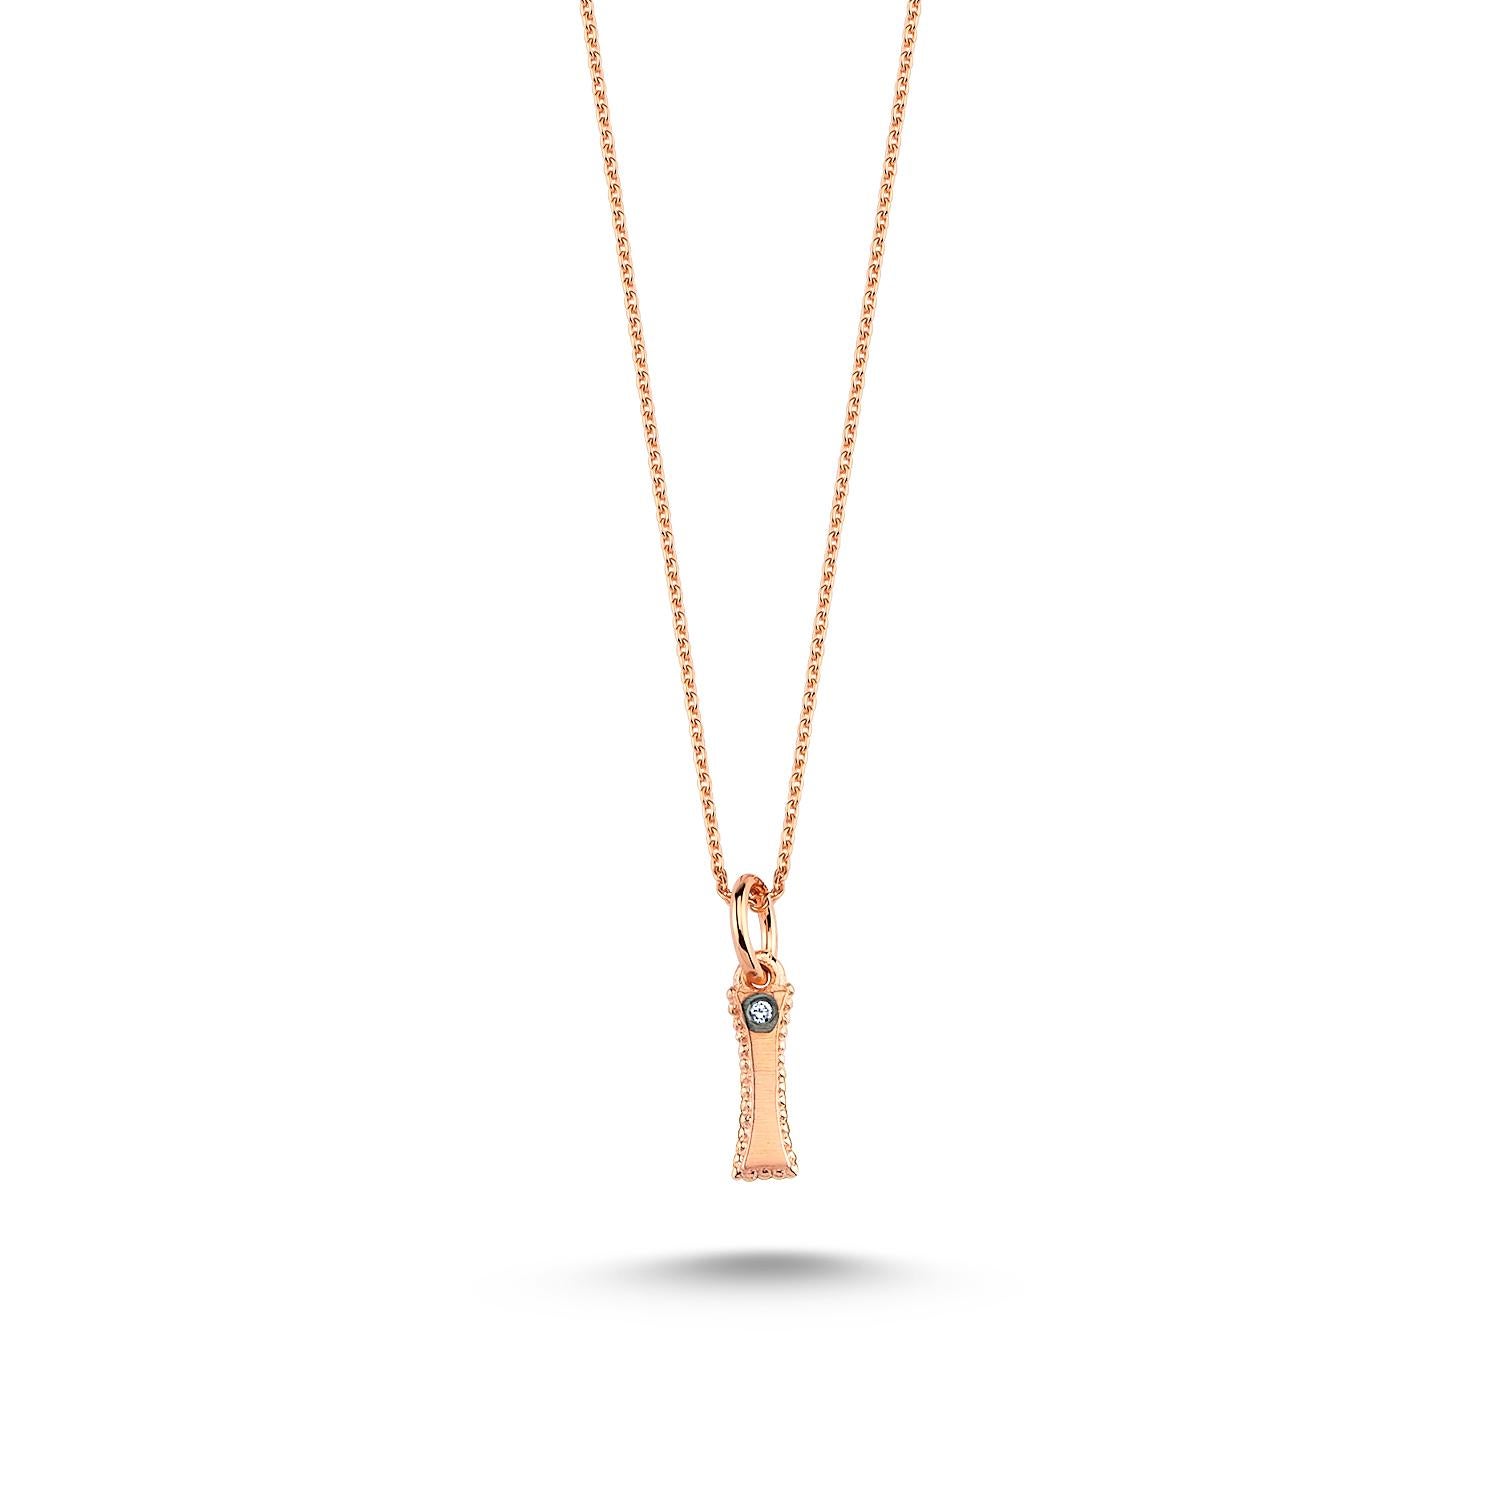 I small necklace in 14k rose gold with 0.01ct white diamond by Selda Jewellery

Additional Information:-
Collection: Letter collection
14K Rose gold
0.01ct White diamond
Pendant height 0.7cm
Chain length 44cm